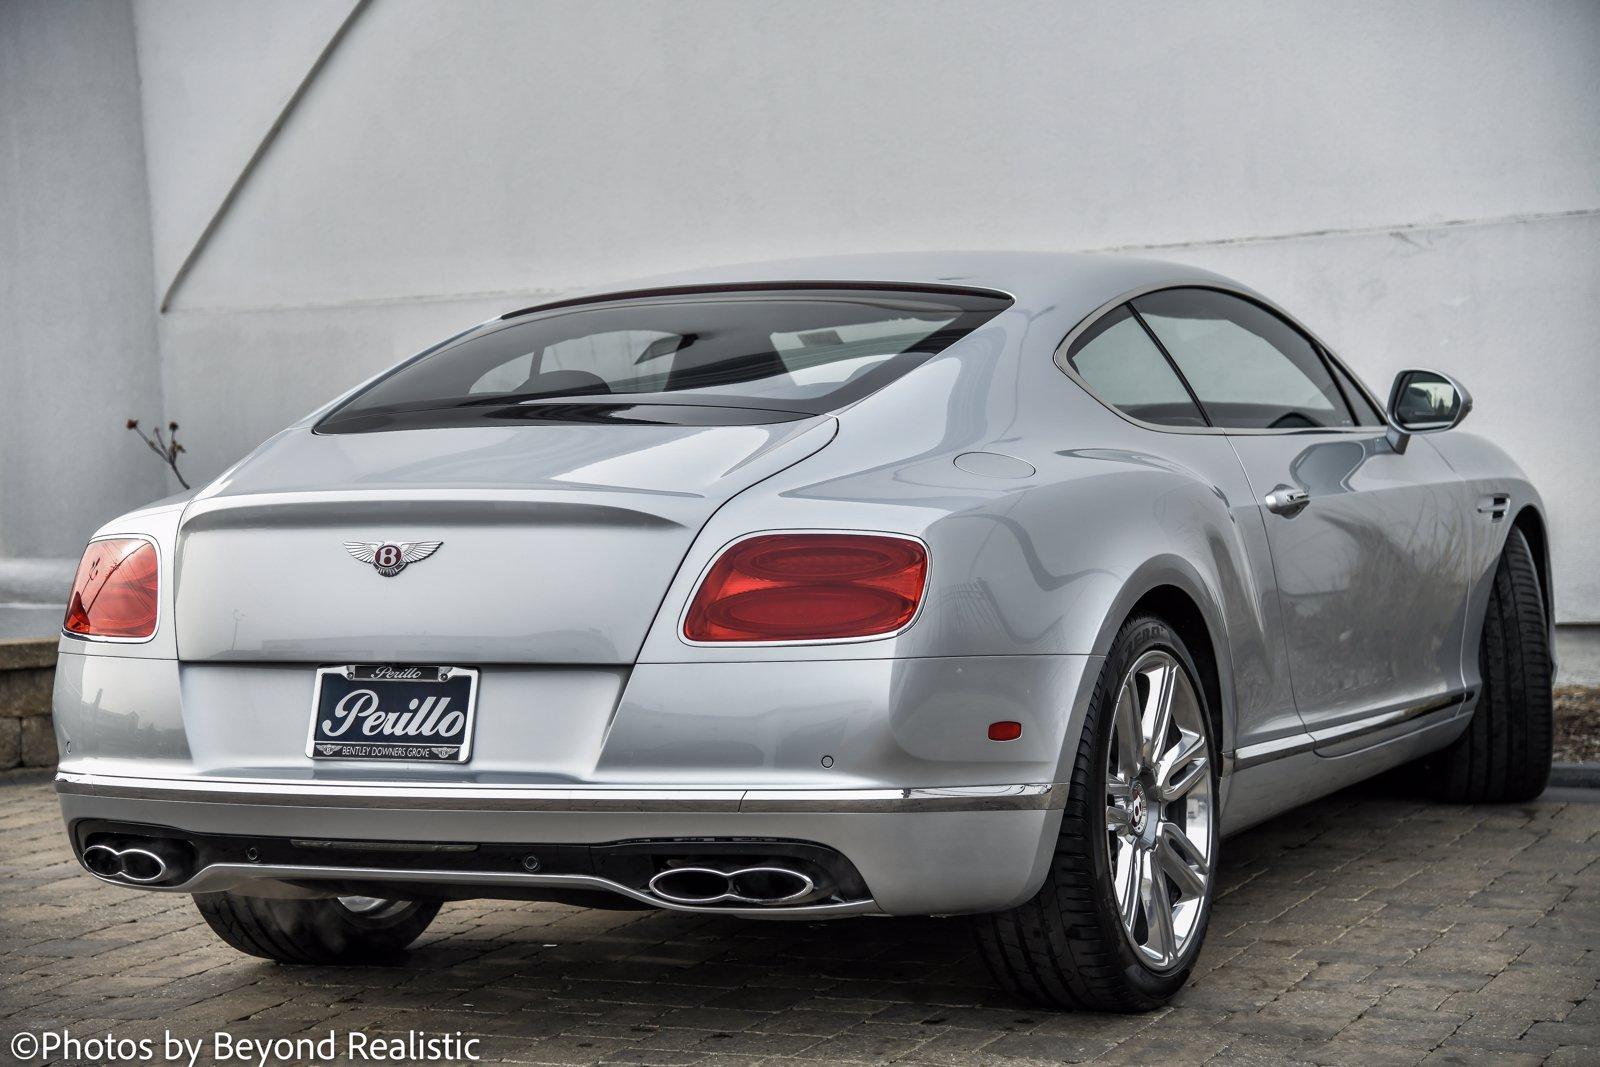 Used 2017 Bentley Continental GT V8 Mulliner, Naim | Downers Grove, IL